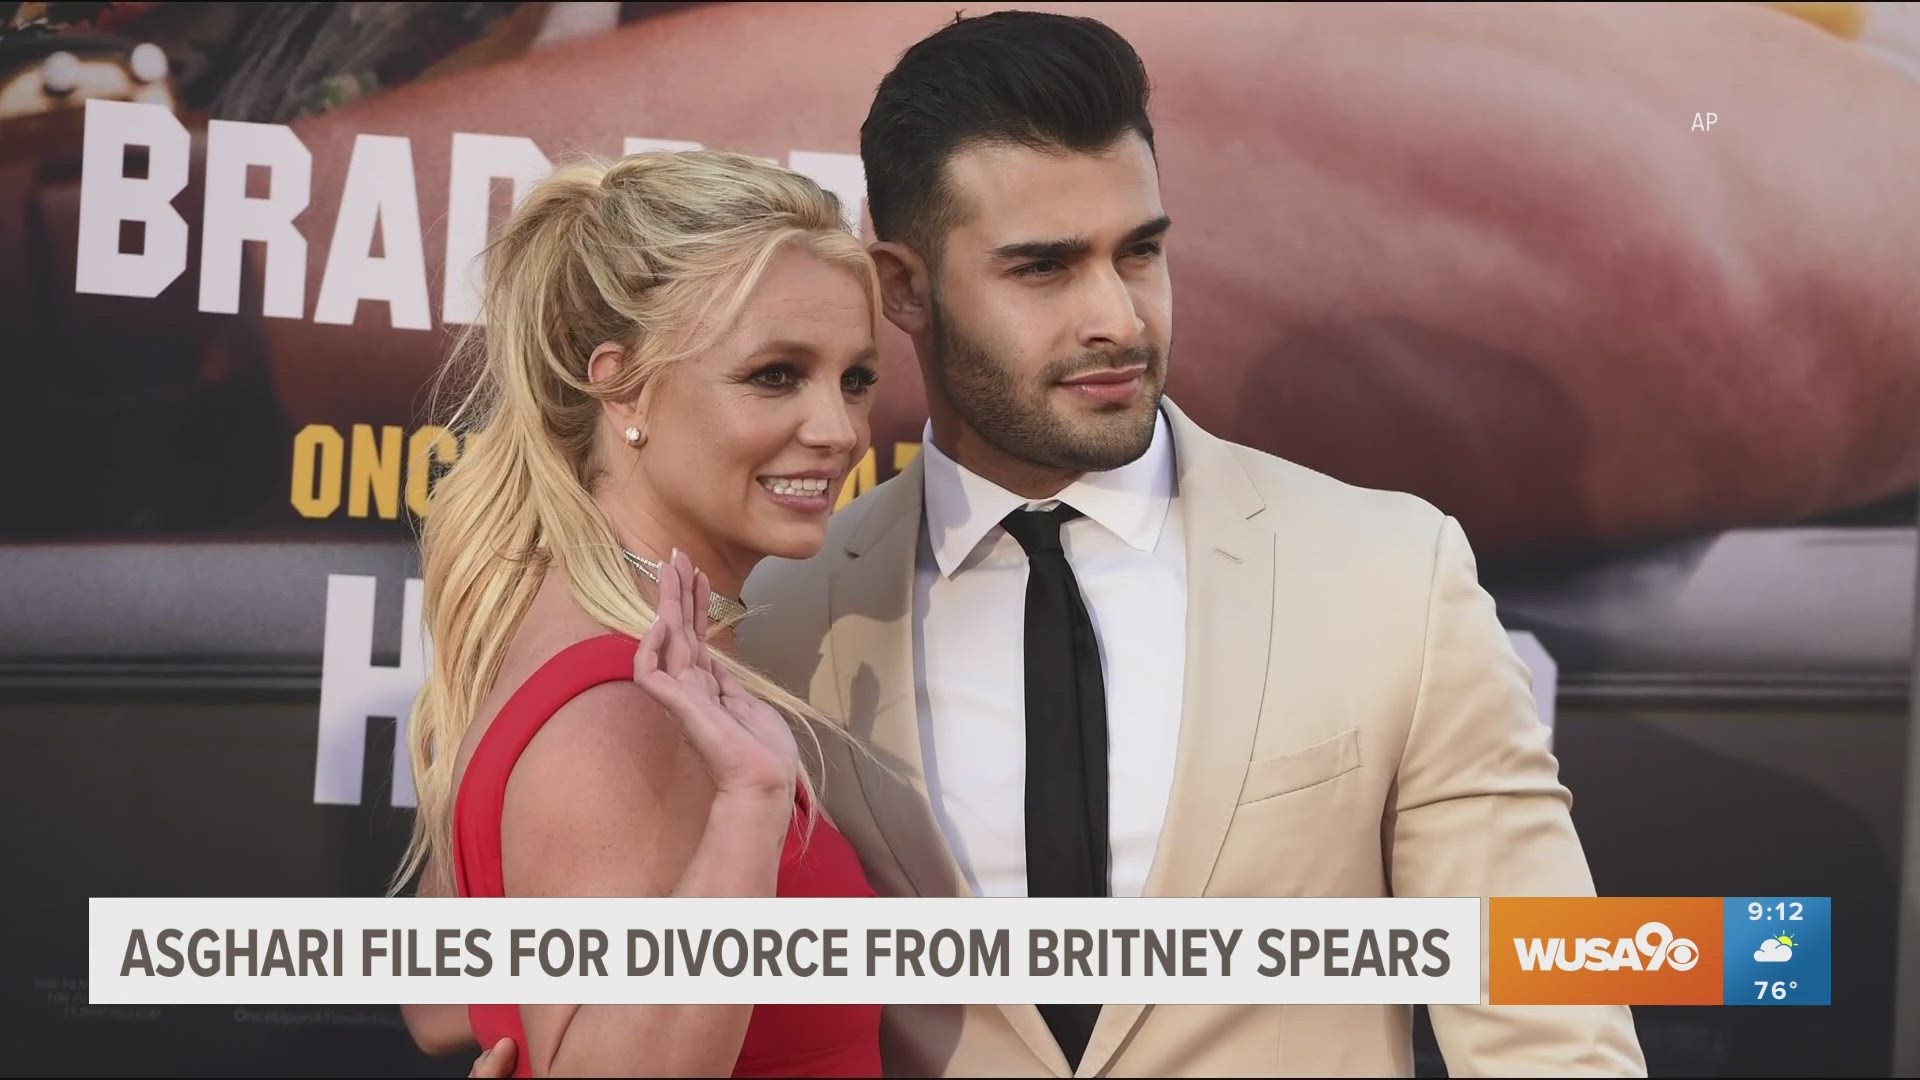 Britney Spears and husband split, Adele reveals gender of couples baby at concert, Bruce Springsteen postpones Philly shows, USWNT coach resigns wusa9 picture